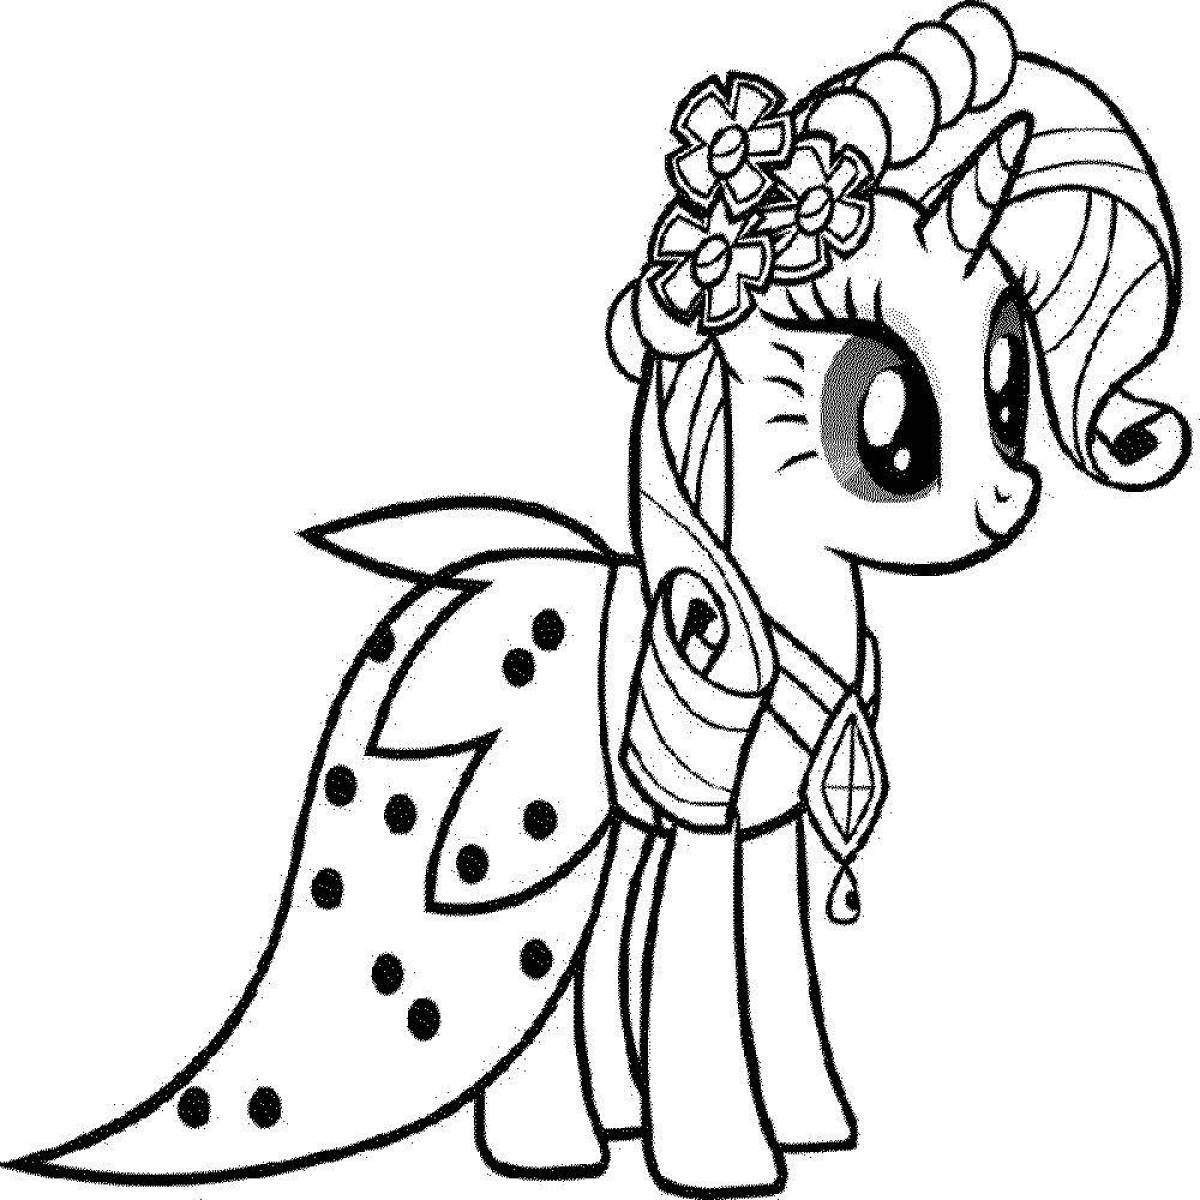 Incredible pony cuties coloring book for girls